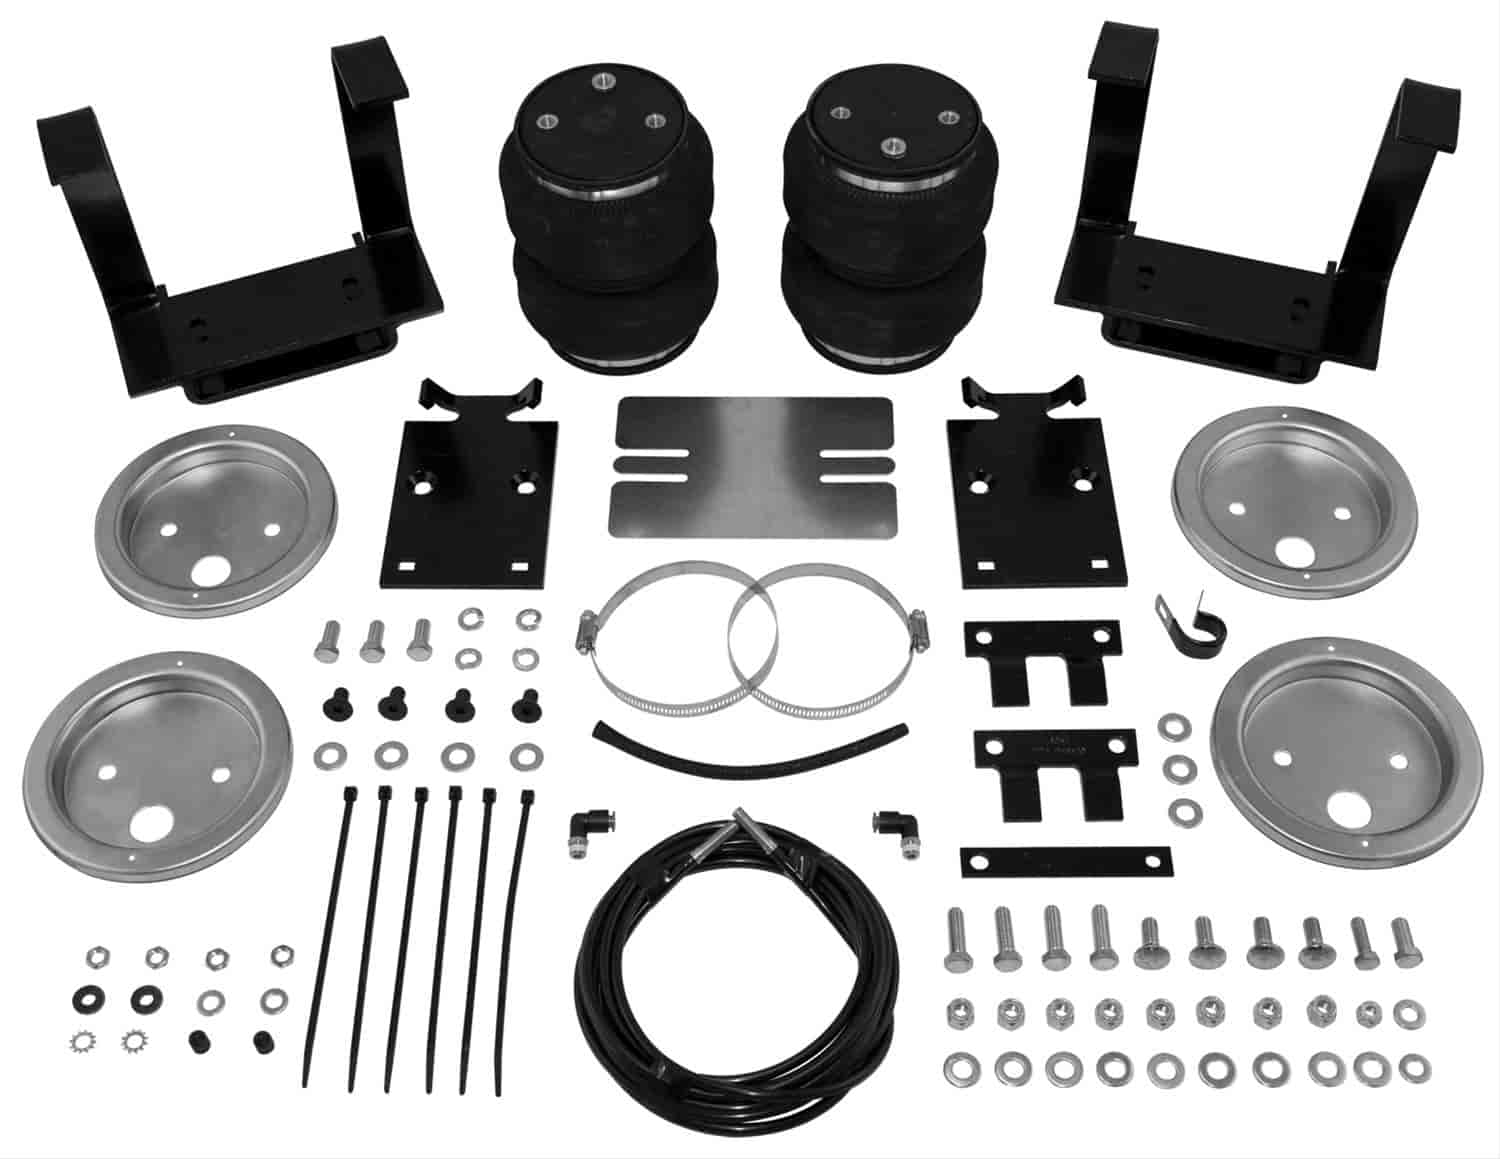 LoadLifter 5000 Rear Kit 2001-12 Chevy/GMC 3500 Commerical Cab & Chassis